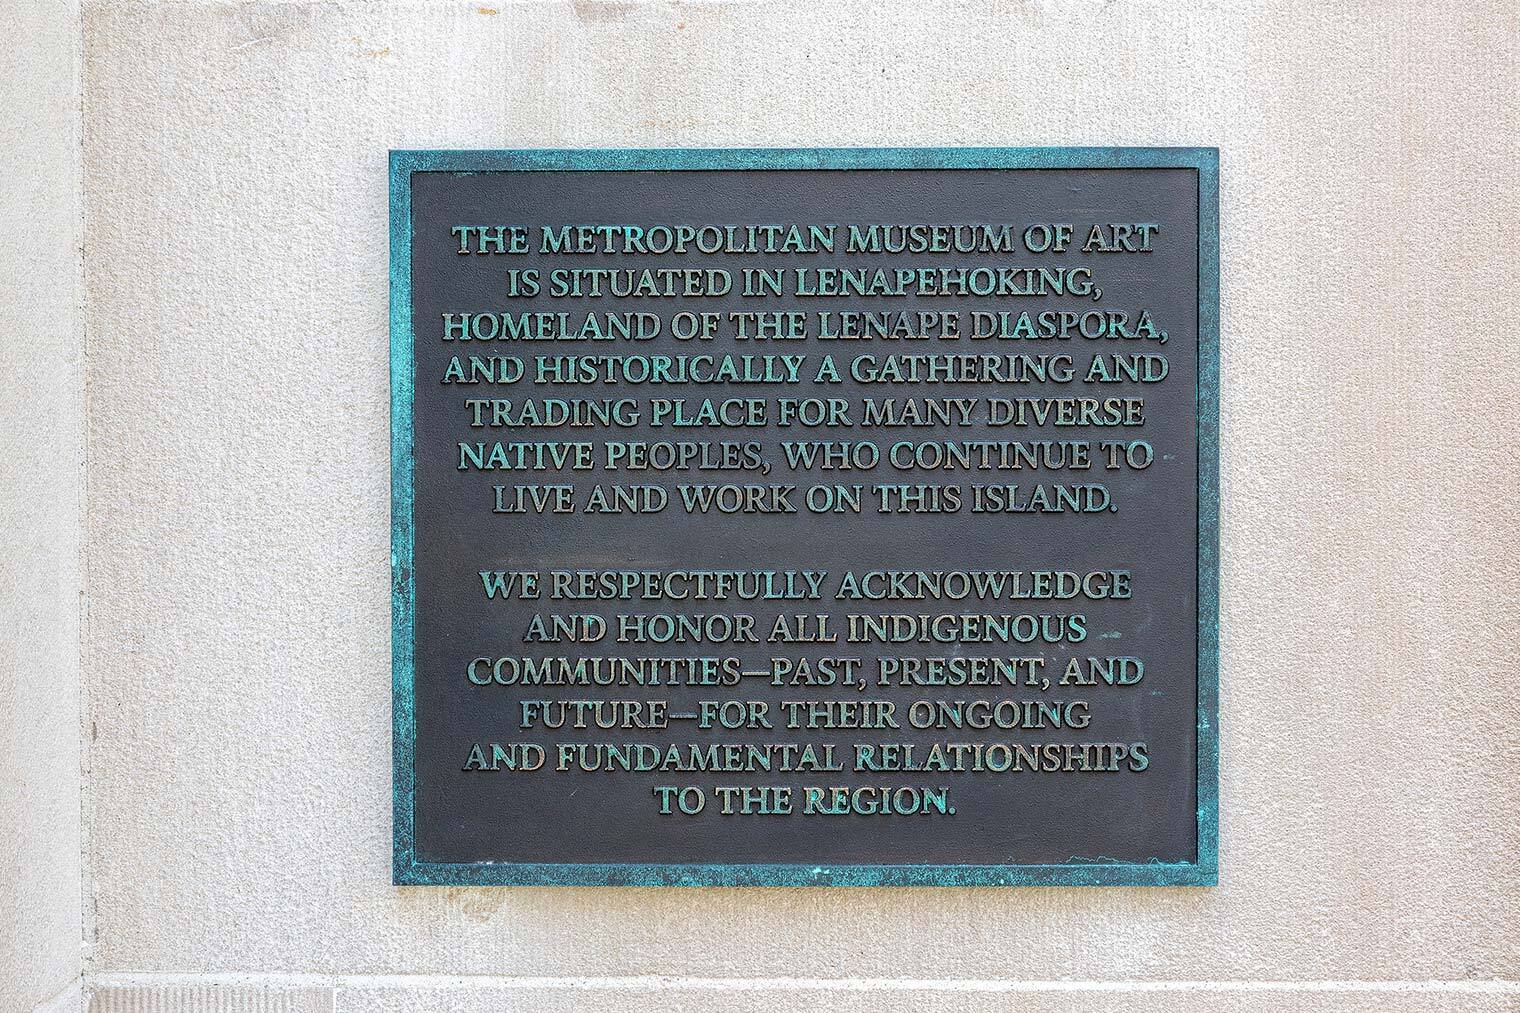 A bronze plaque mounted on the facade of The Met